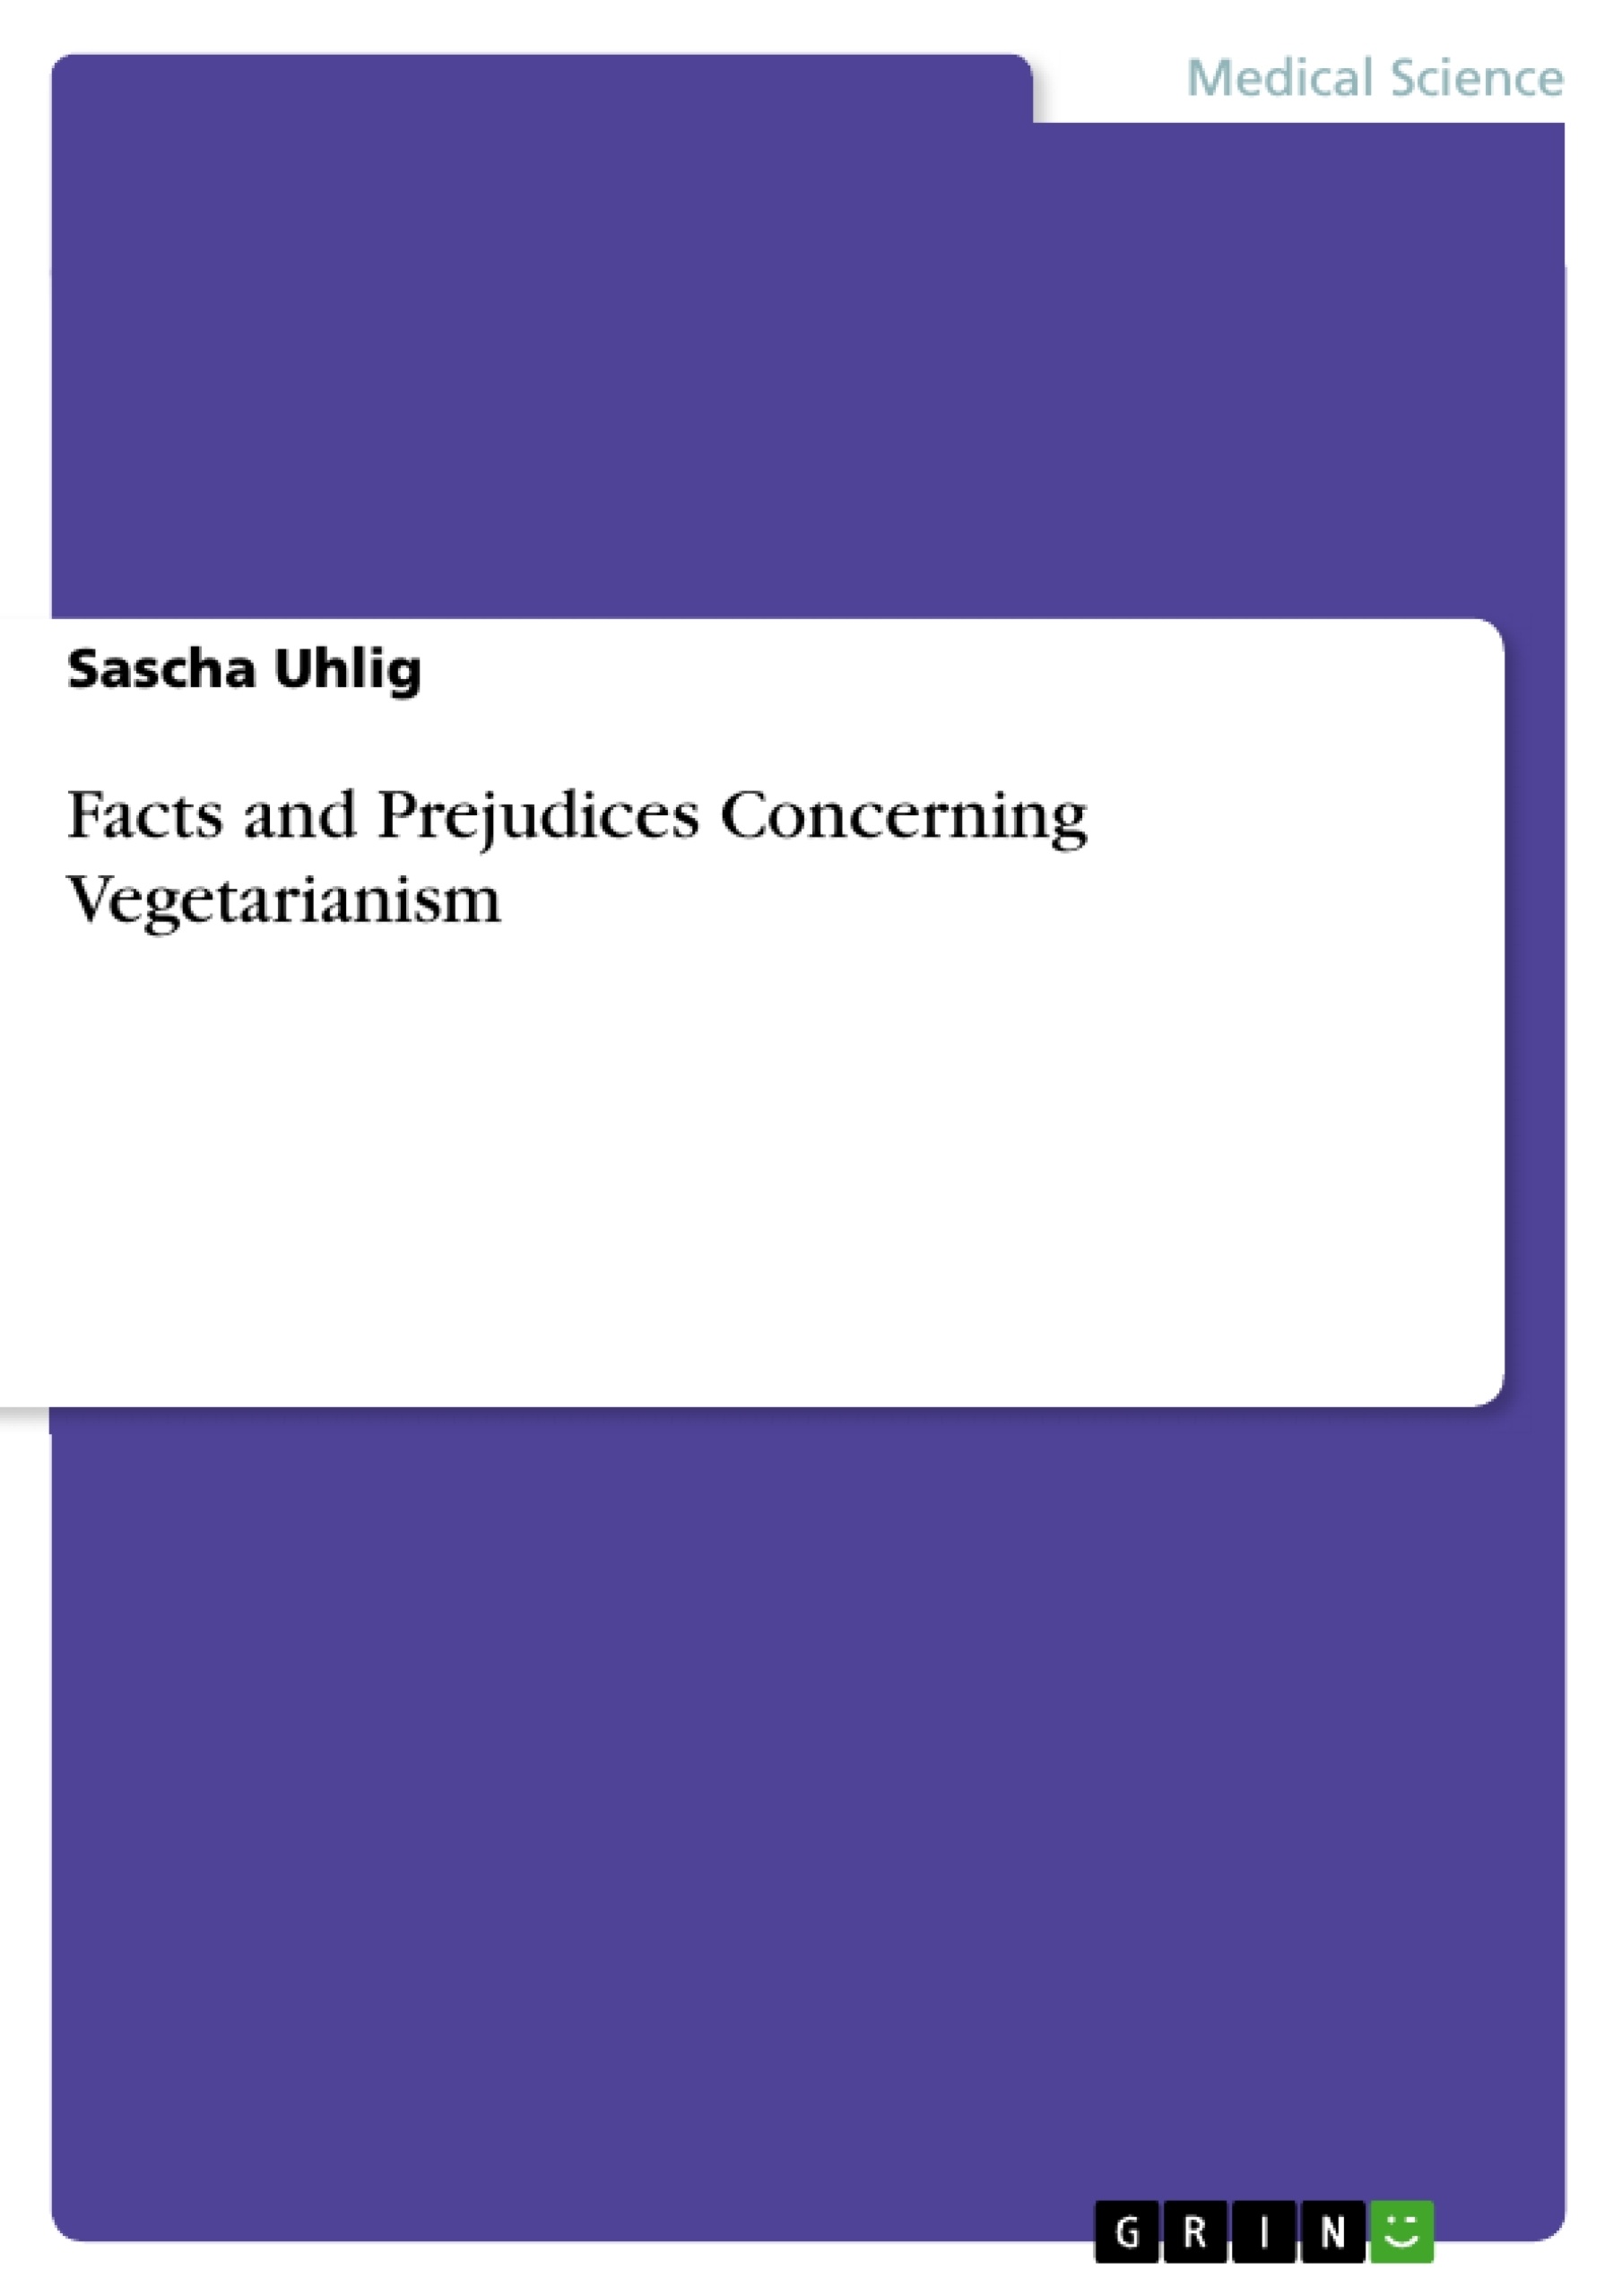 Título: Facts and Prejudices Concerning Vegetarianism